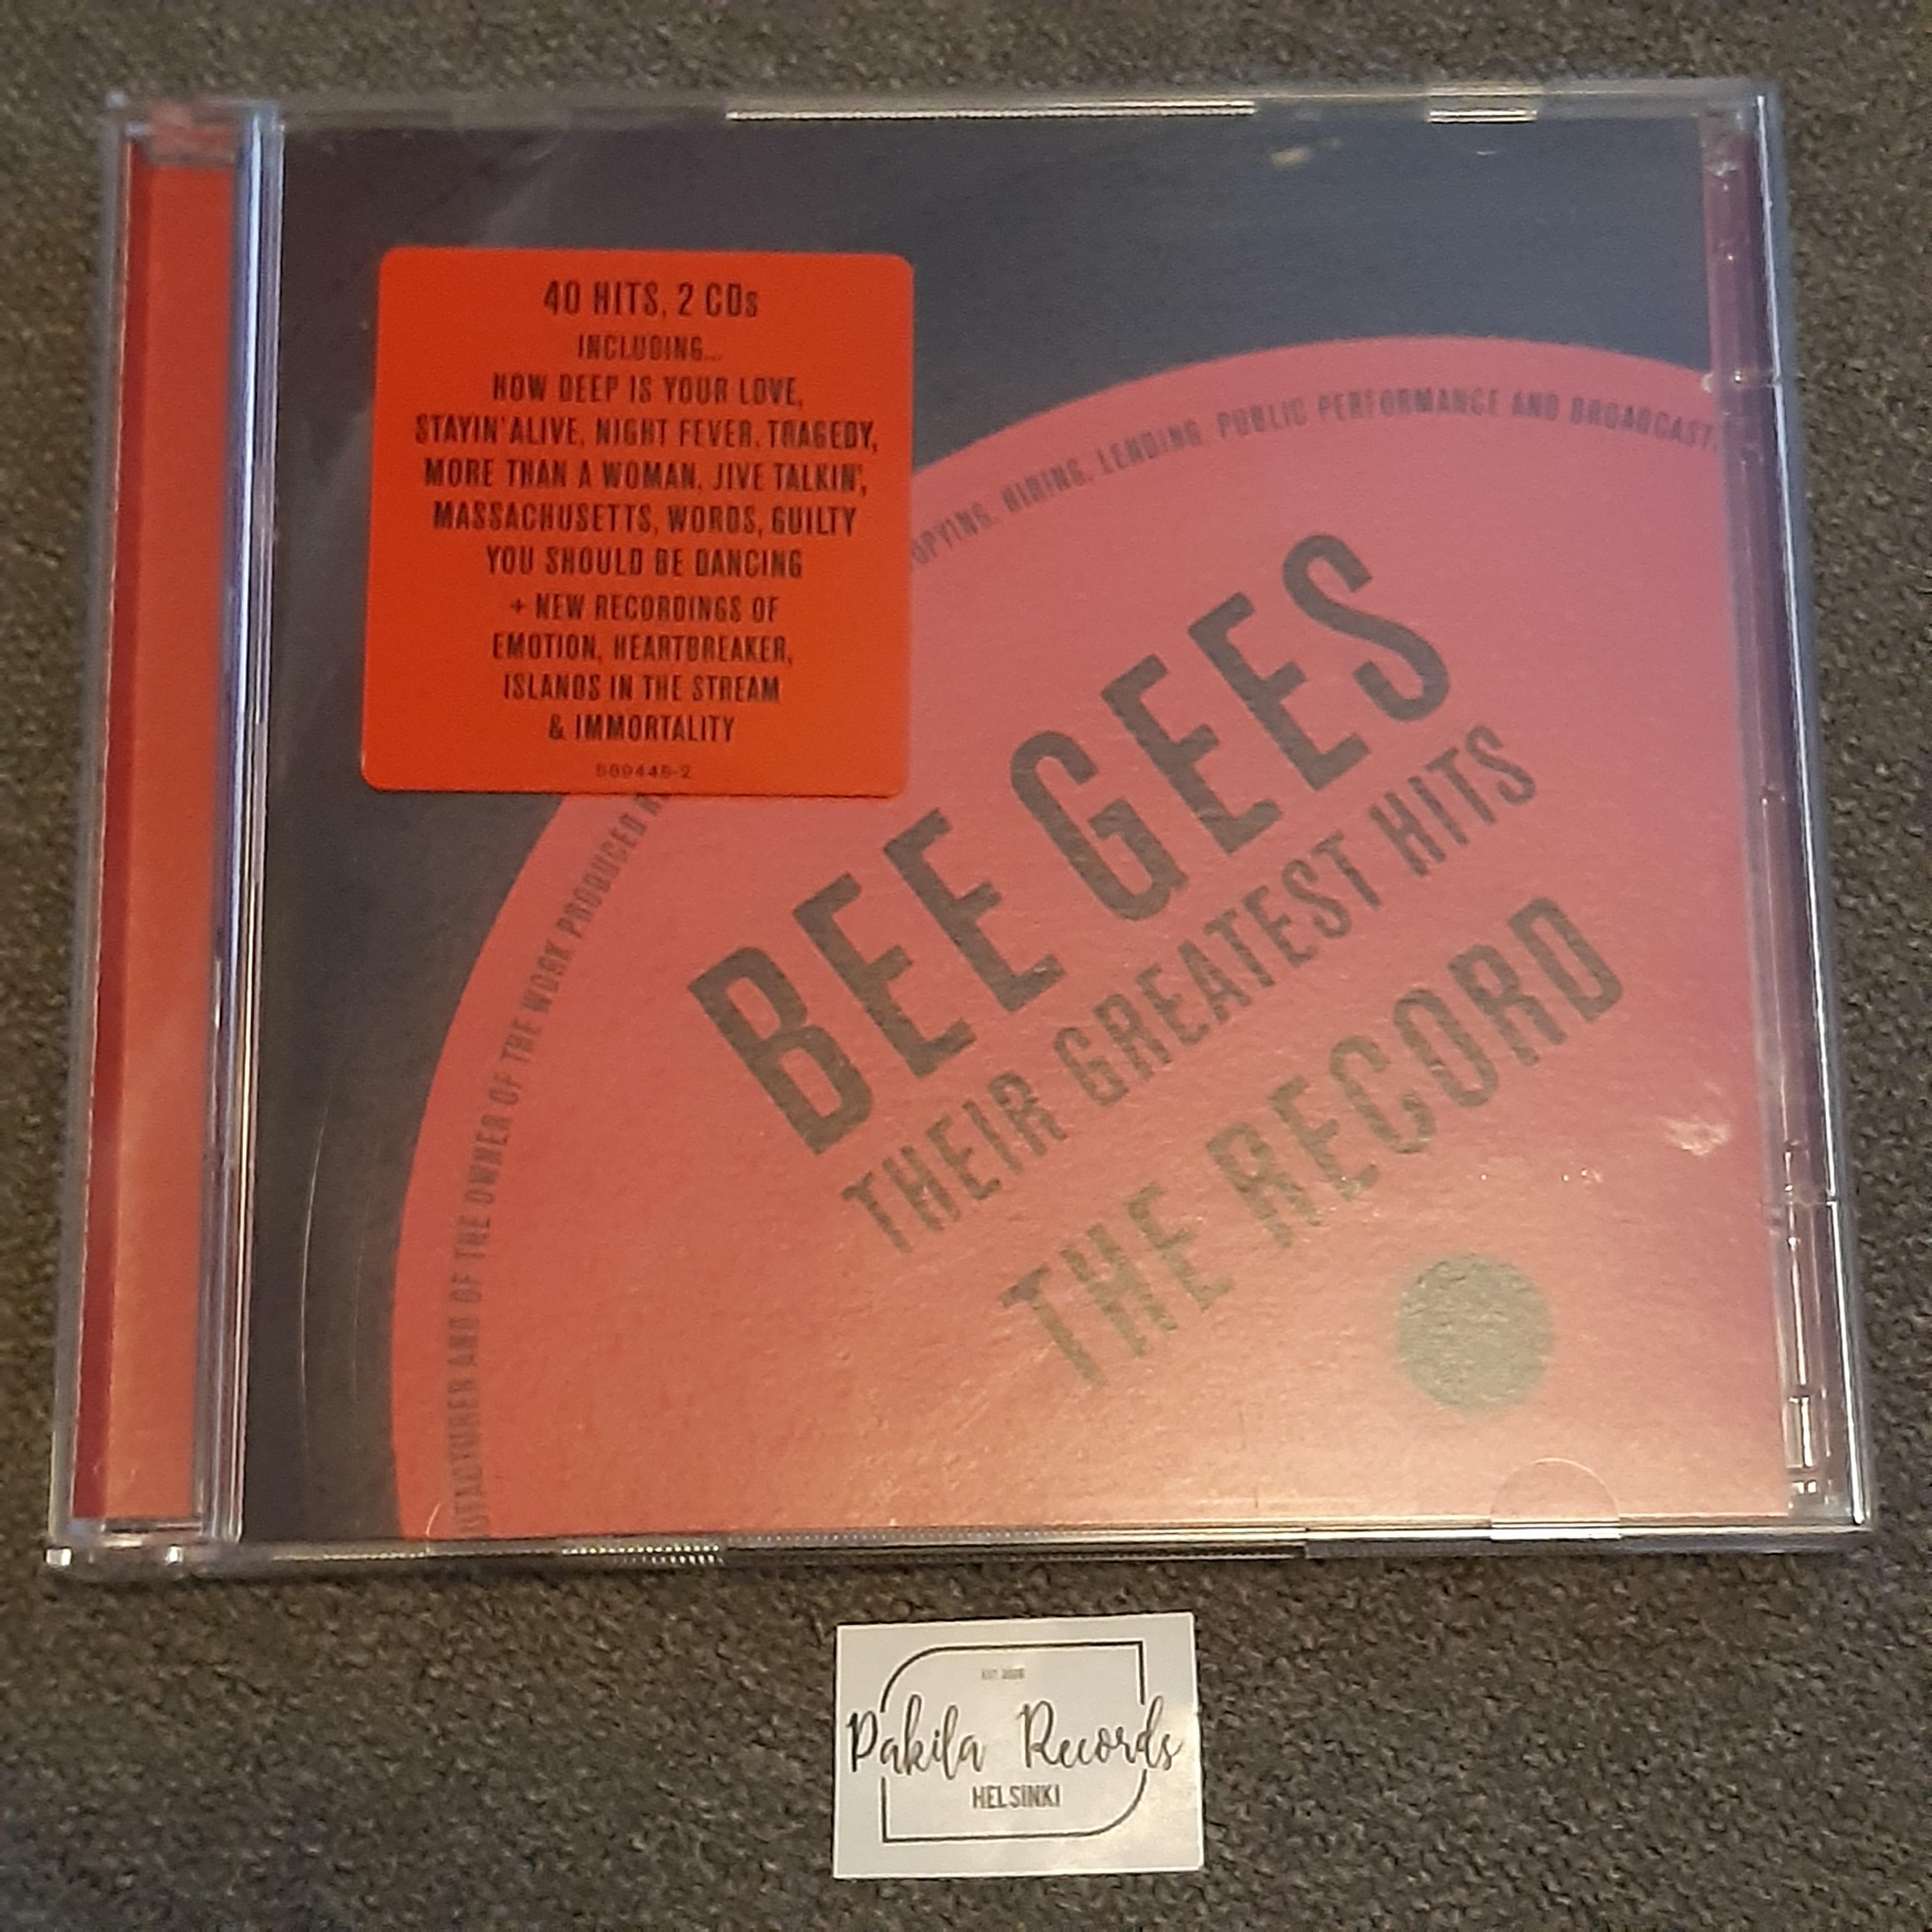 Bee Gees - Their Greatest Hits The Record - 2 CD (käytetty)